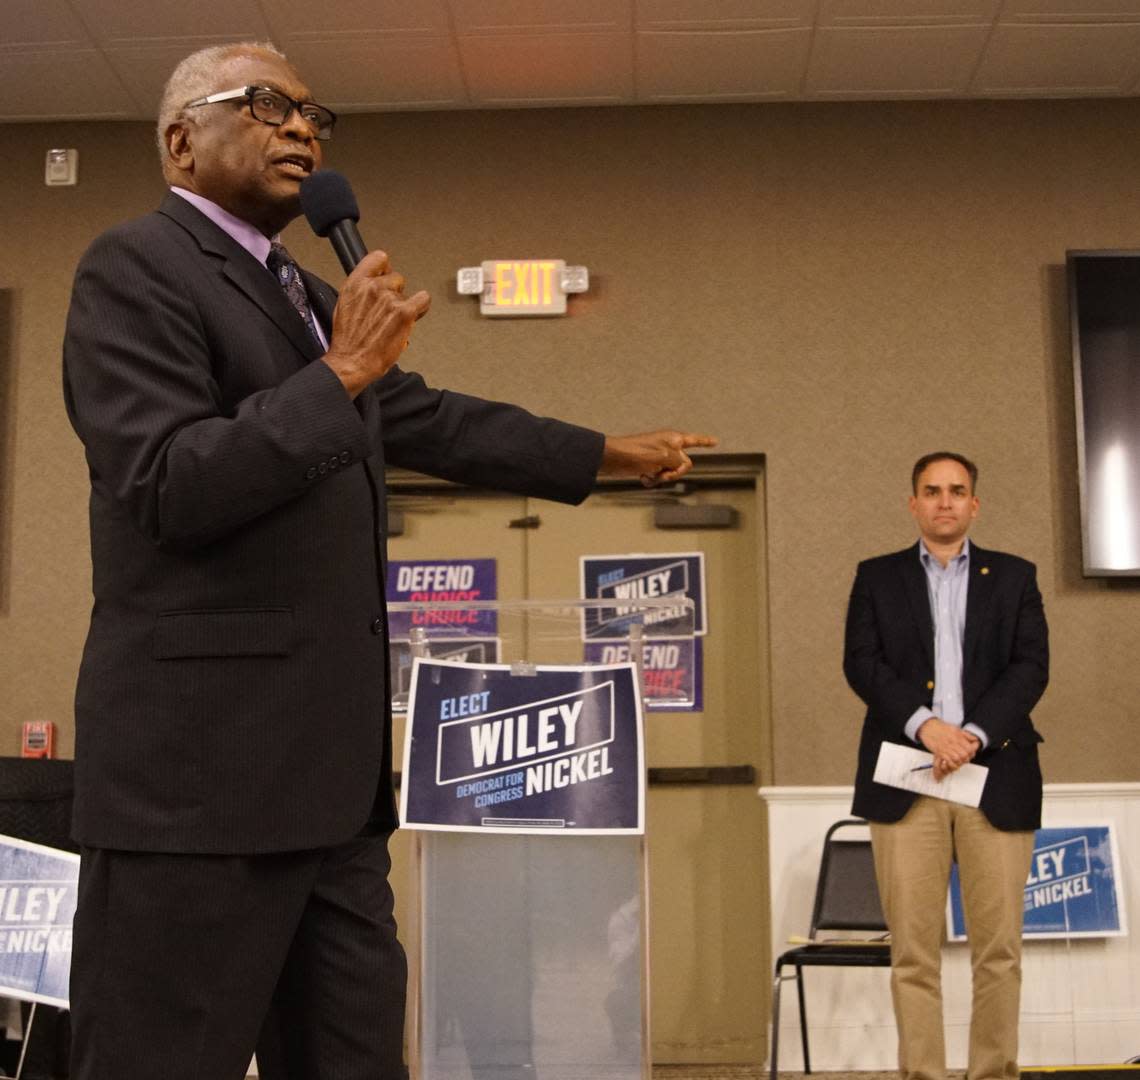 U.S. House Majority Whip Jim Clyburn speaks at a campaign event in Smithfield, N.C. in support of Wiley Nickel, a Democrat running for Congress from the 13th district.